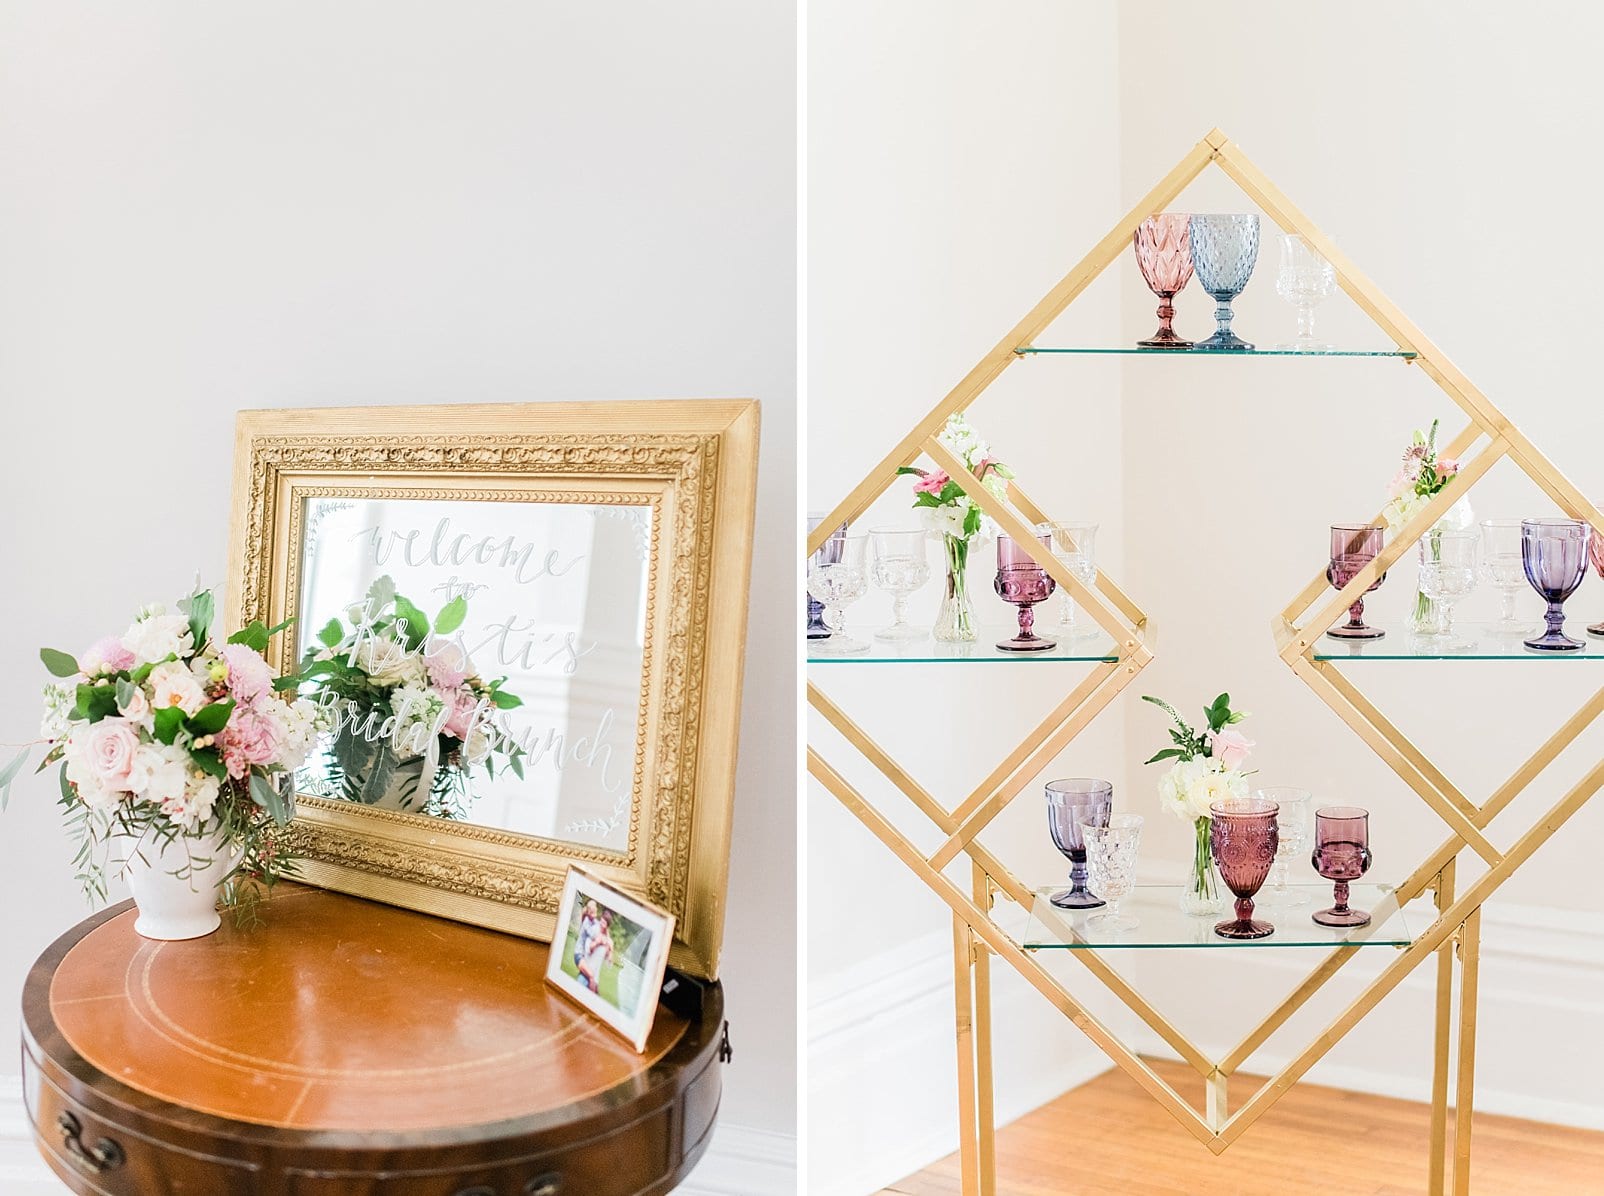 Greenhouse picker sisters specialty rentals gold geometric display styled with colored glass goblets photo